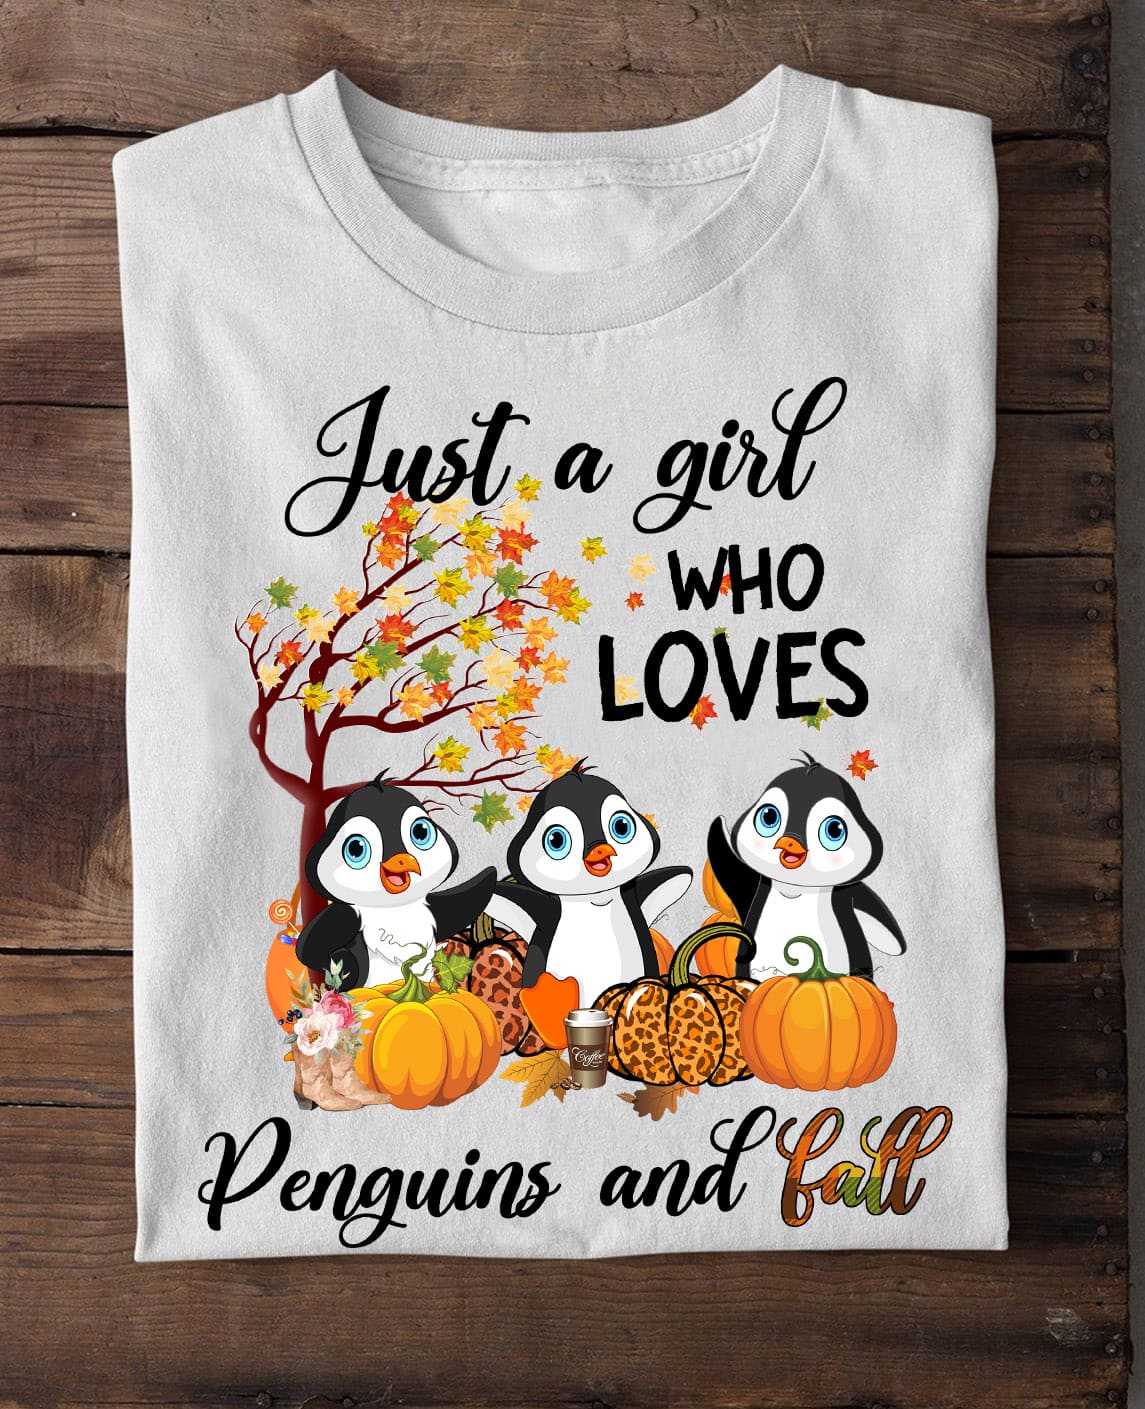 Just a girl who loves penguins and fall - Fall wonderful season, gorgeous penguin with pumpkin